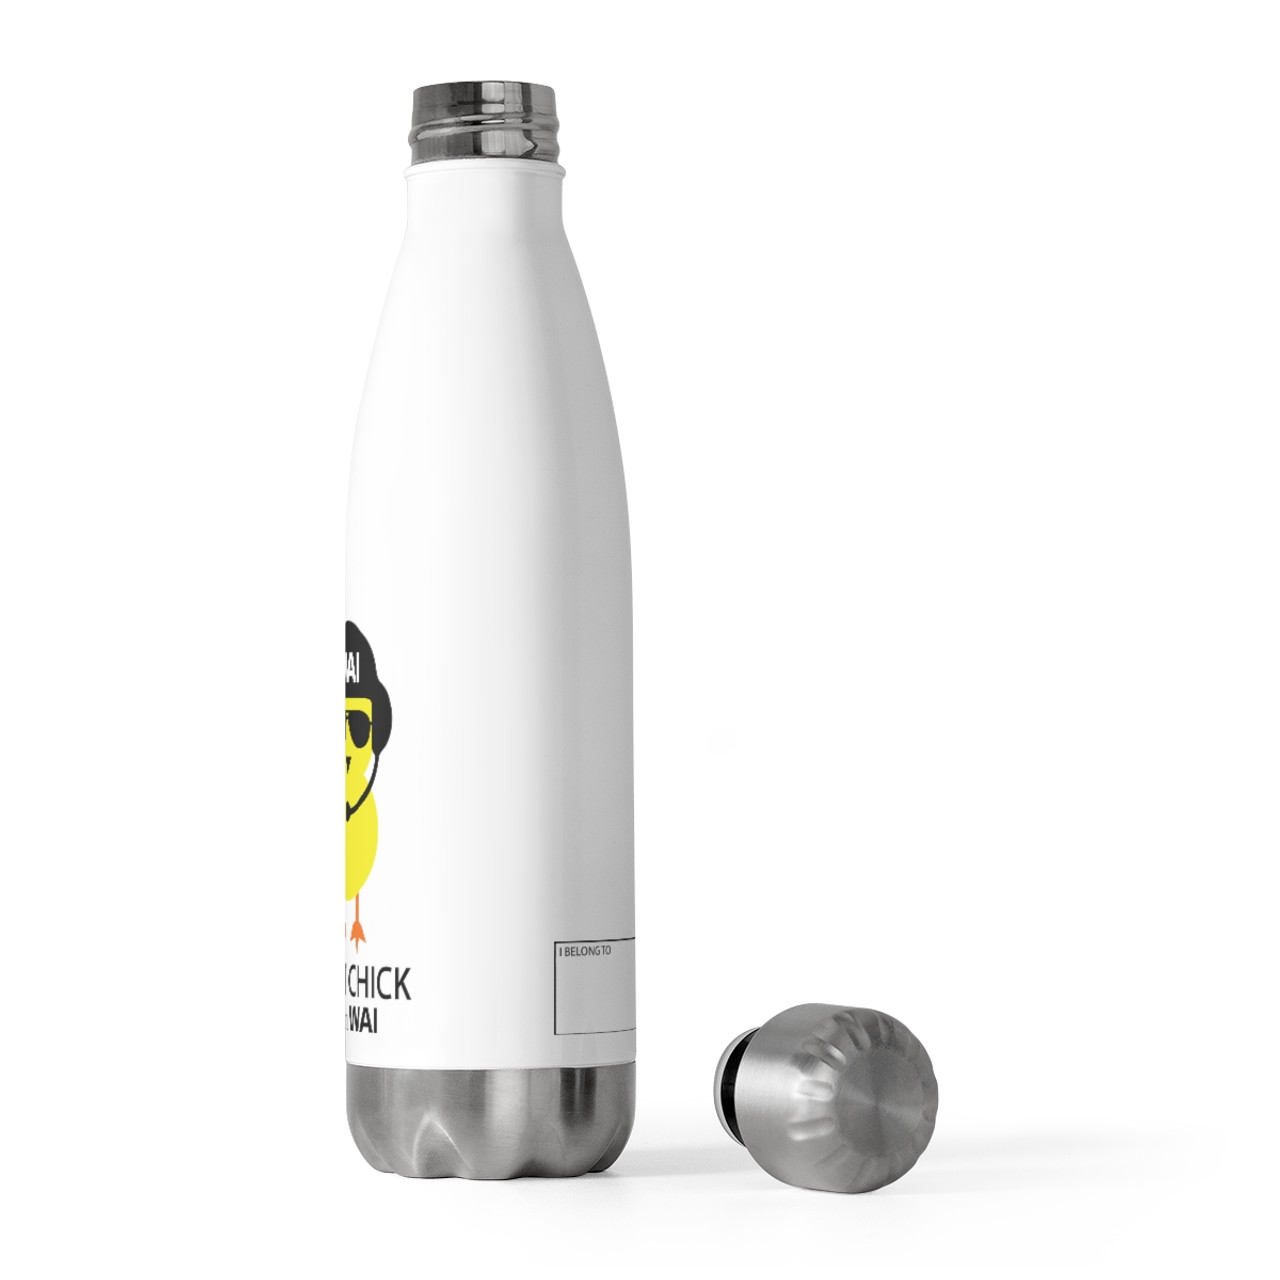 https://cdn11.bigcommerce.com/s-sqlllpksfp/images/stencil/1280x1280/products/172/709/pilot-chick-20oz-stainless-steel-insulated-bottle__48647.1671030486.jpg?c=1?imbypass=on